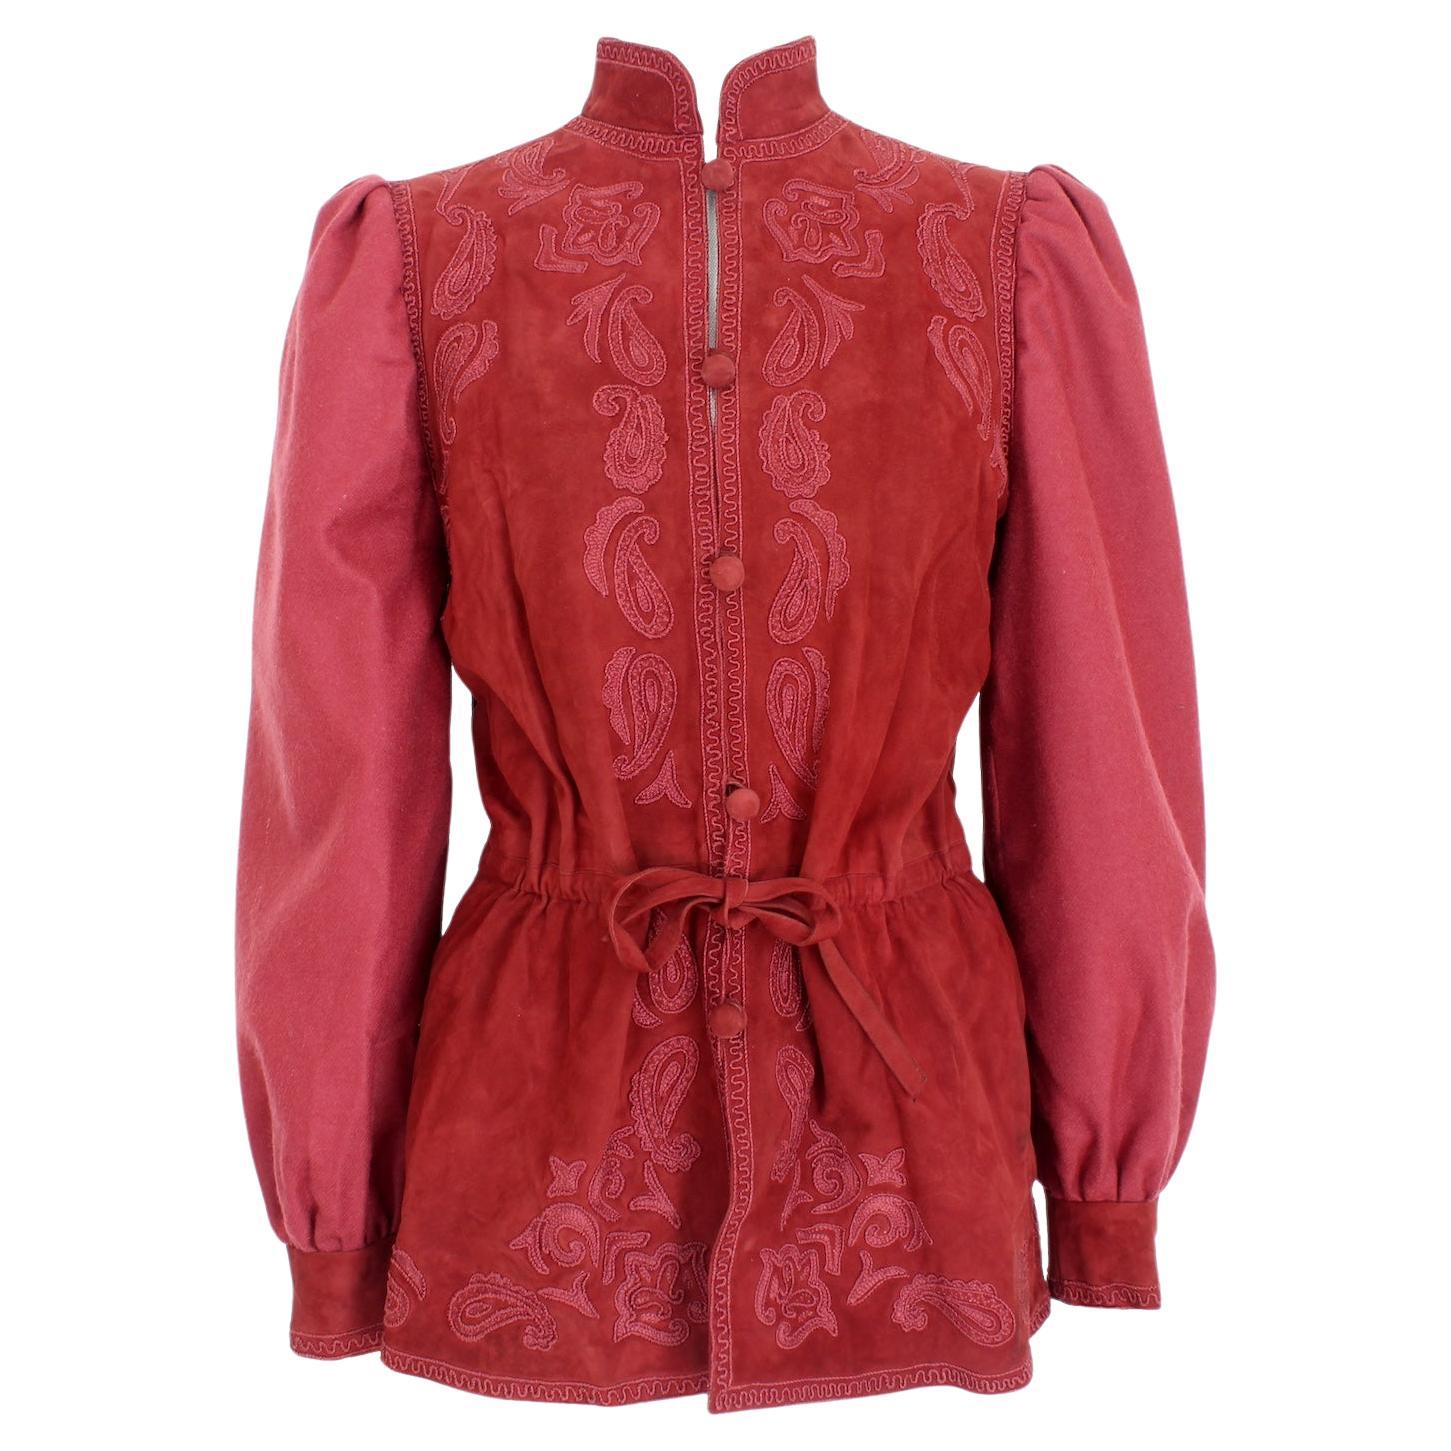 Lancetti Red Leather Paisley Jacket Blazer 1980s For Sale